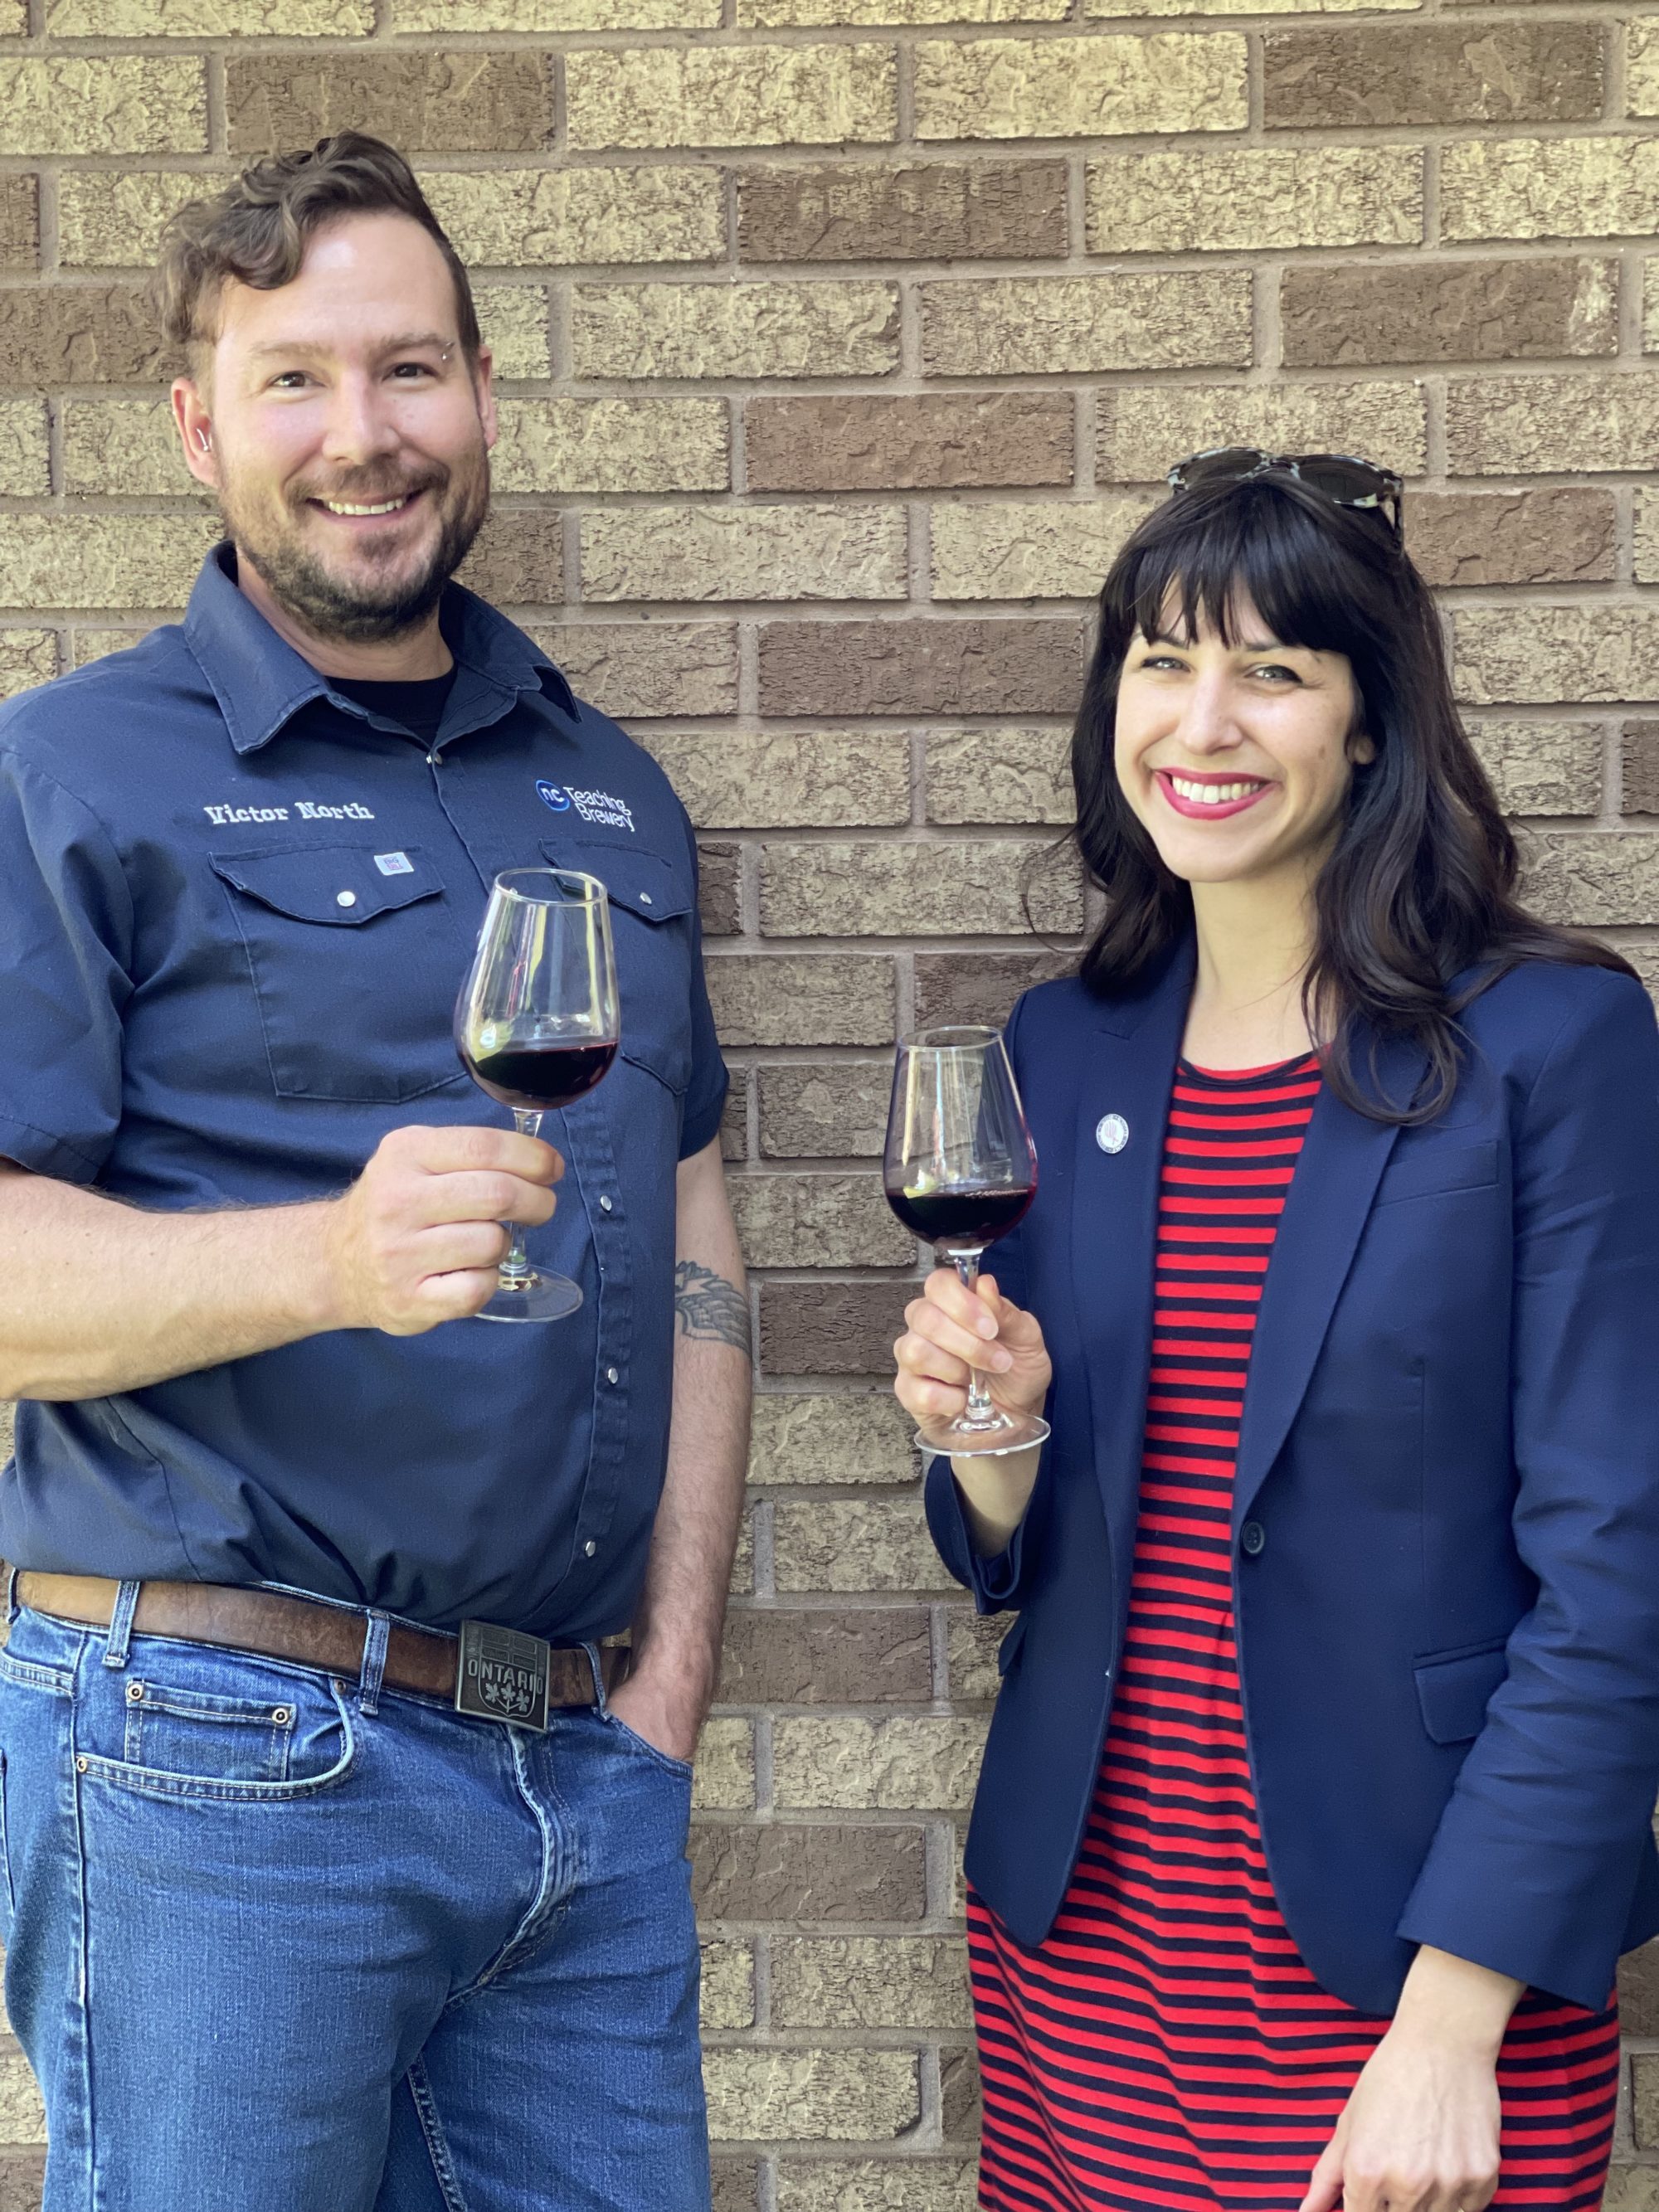 A man and woman stand outside with wine glasses.